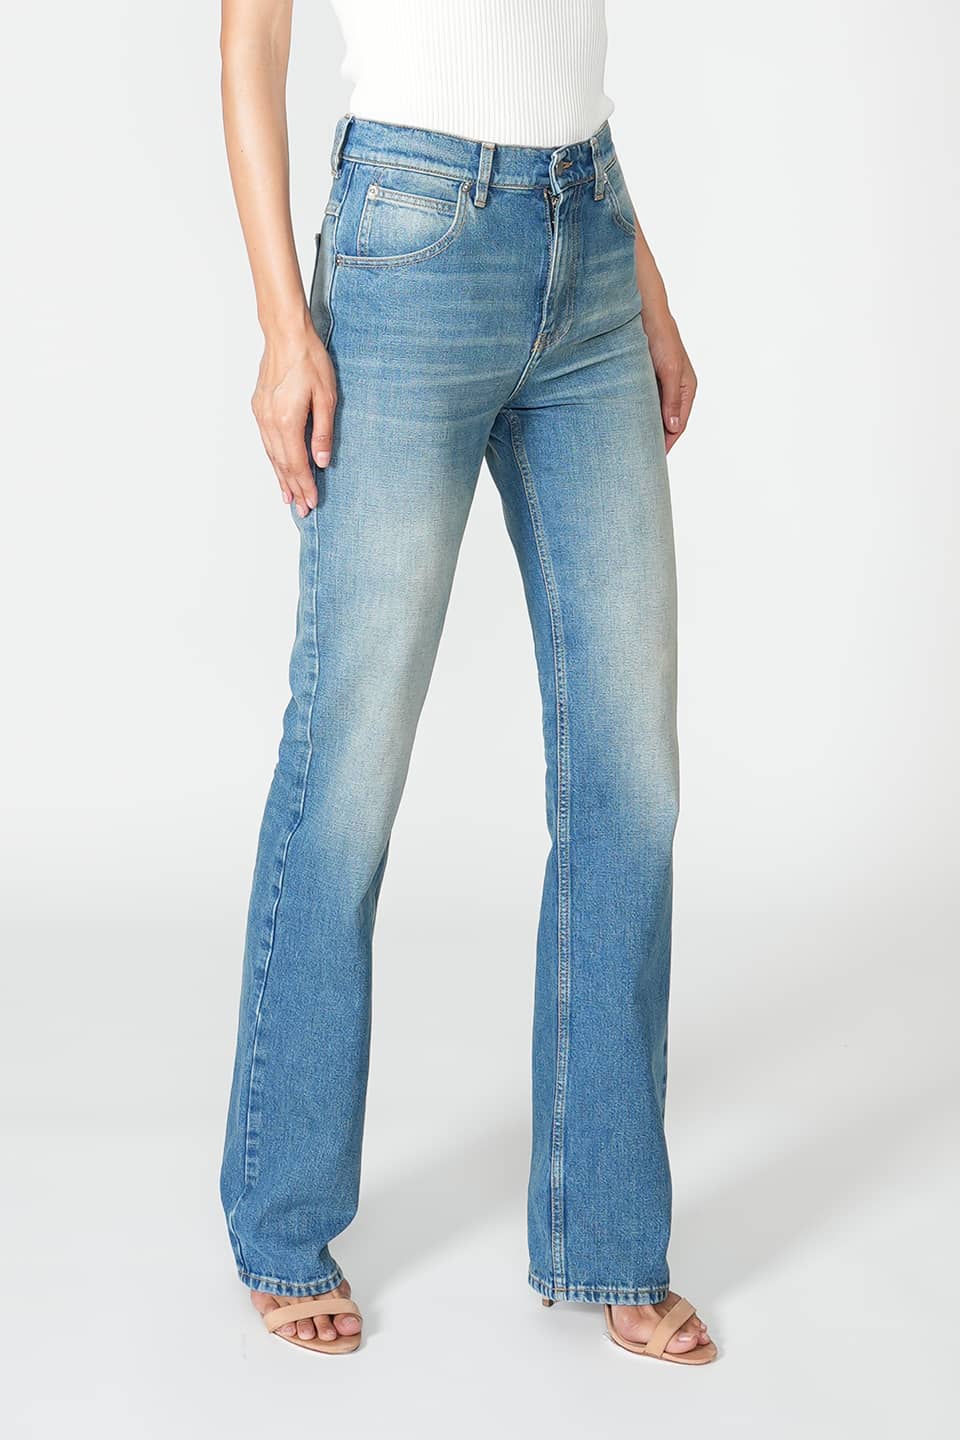 Designer Indigo Jeans, shop online with free delivery in UAE. Product gallery 3